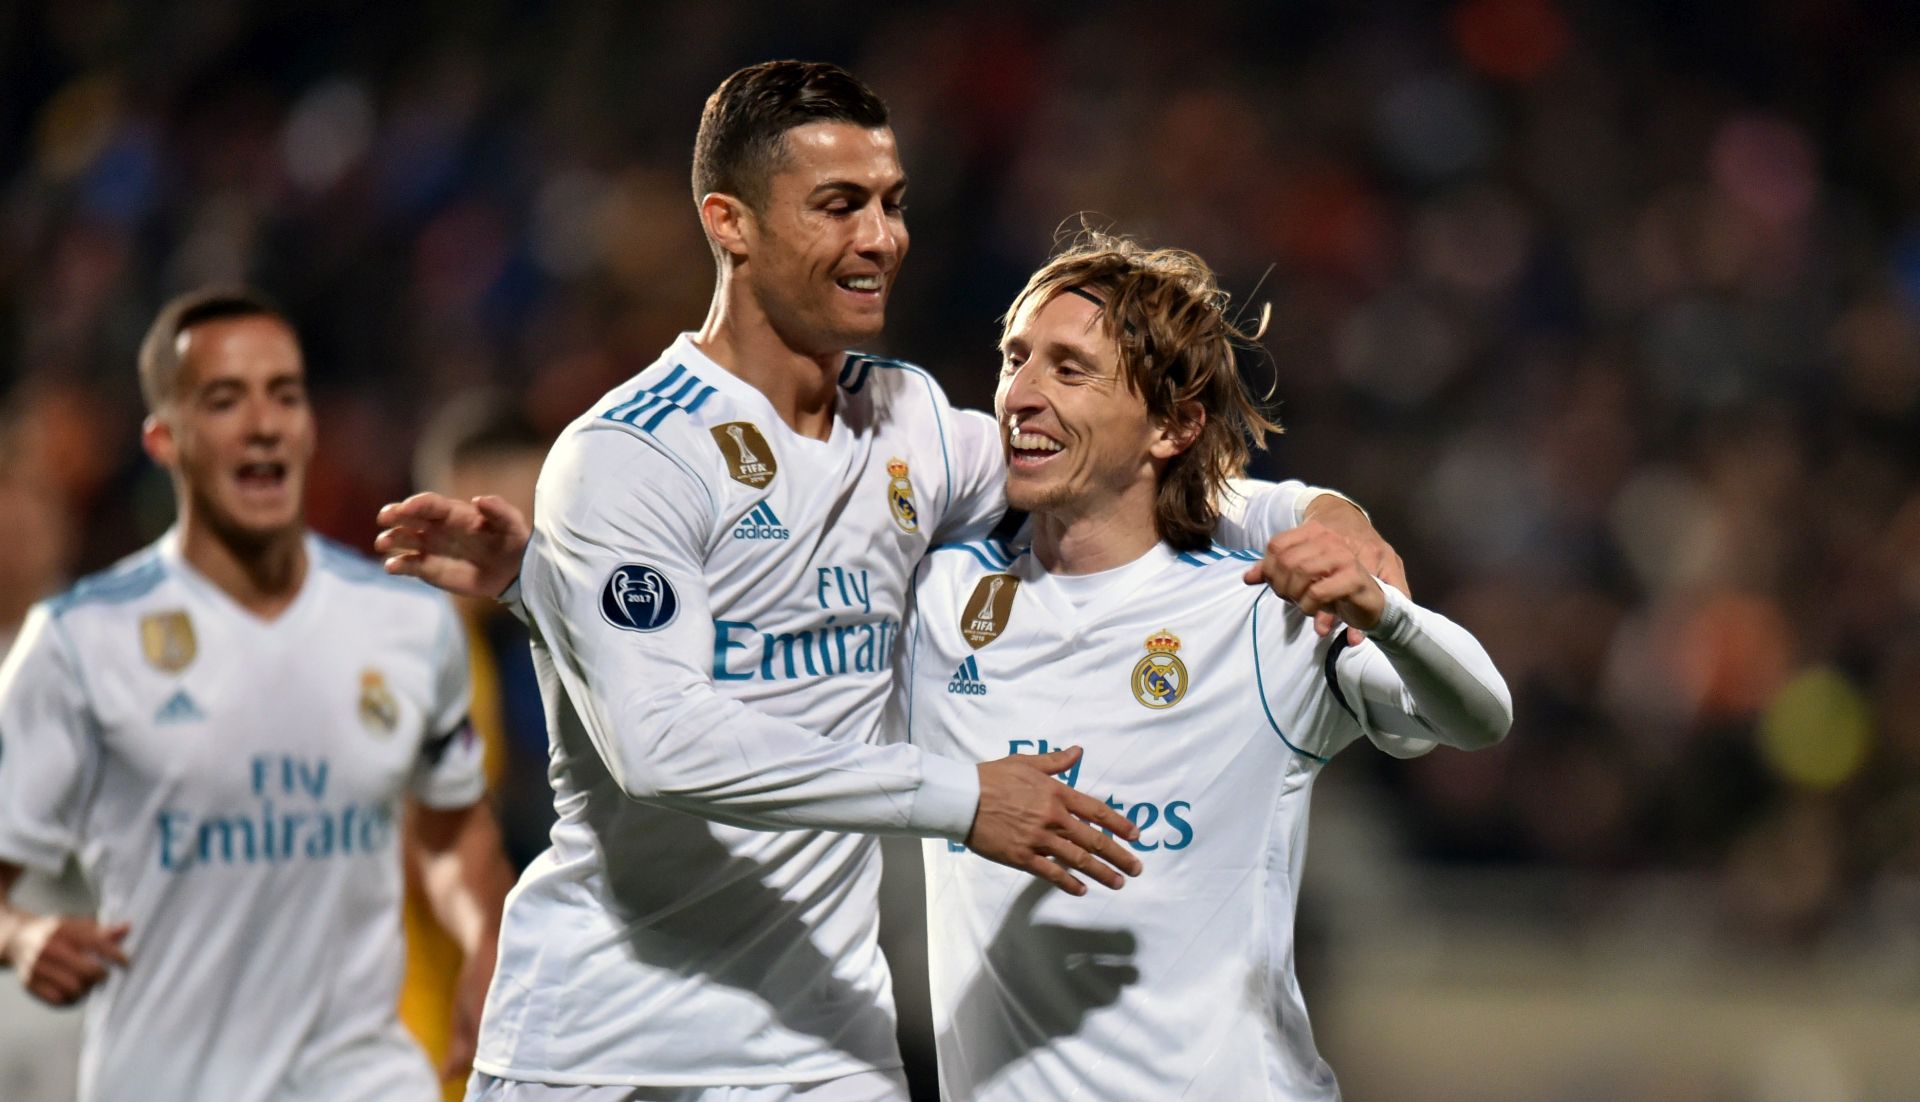 epa06342887 Real Madrid's players Luka Modric (R) and Cristiano Ronaldo celebrate a goal during the UEFA Champions League Group H match between Apoel FC and Real Madrid at the GSP stadium in Nicosia, Cyprus, 21 November 2017.  EPA/KATIA CHRISTODOULOU